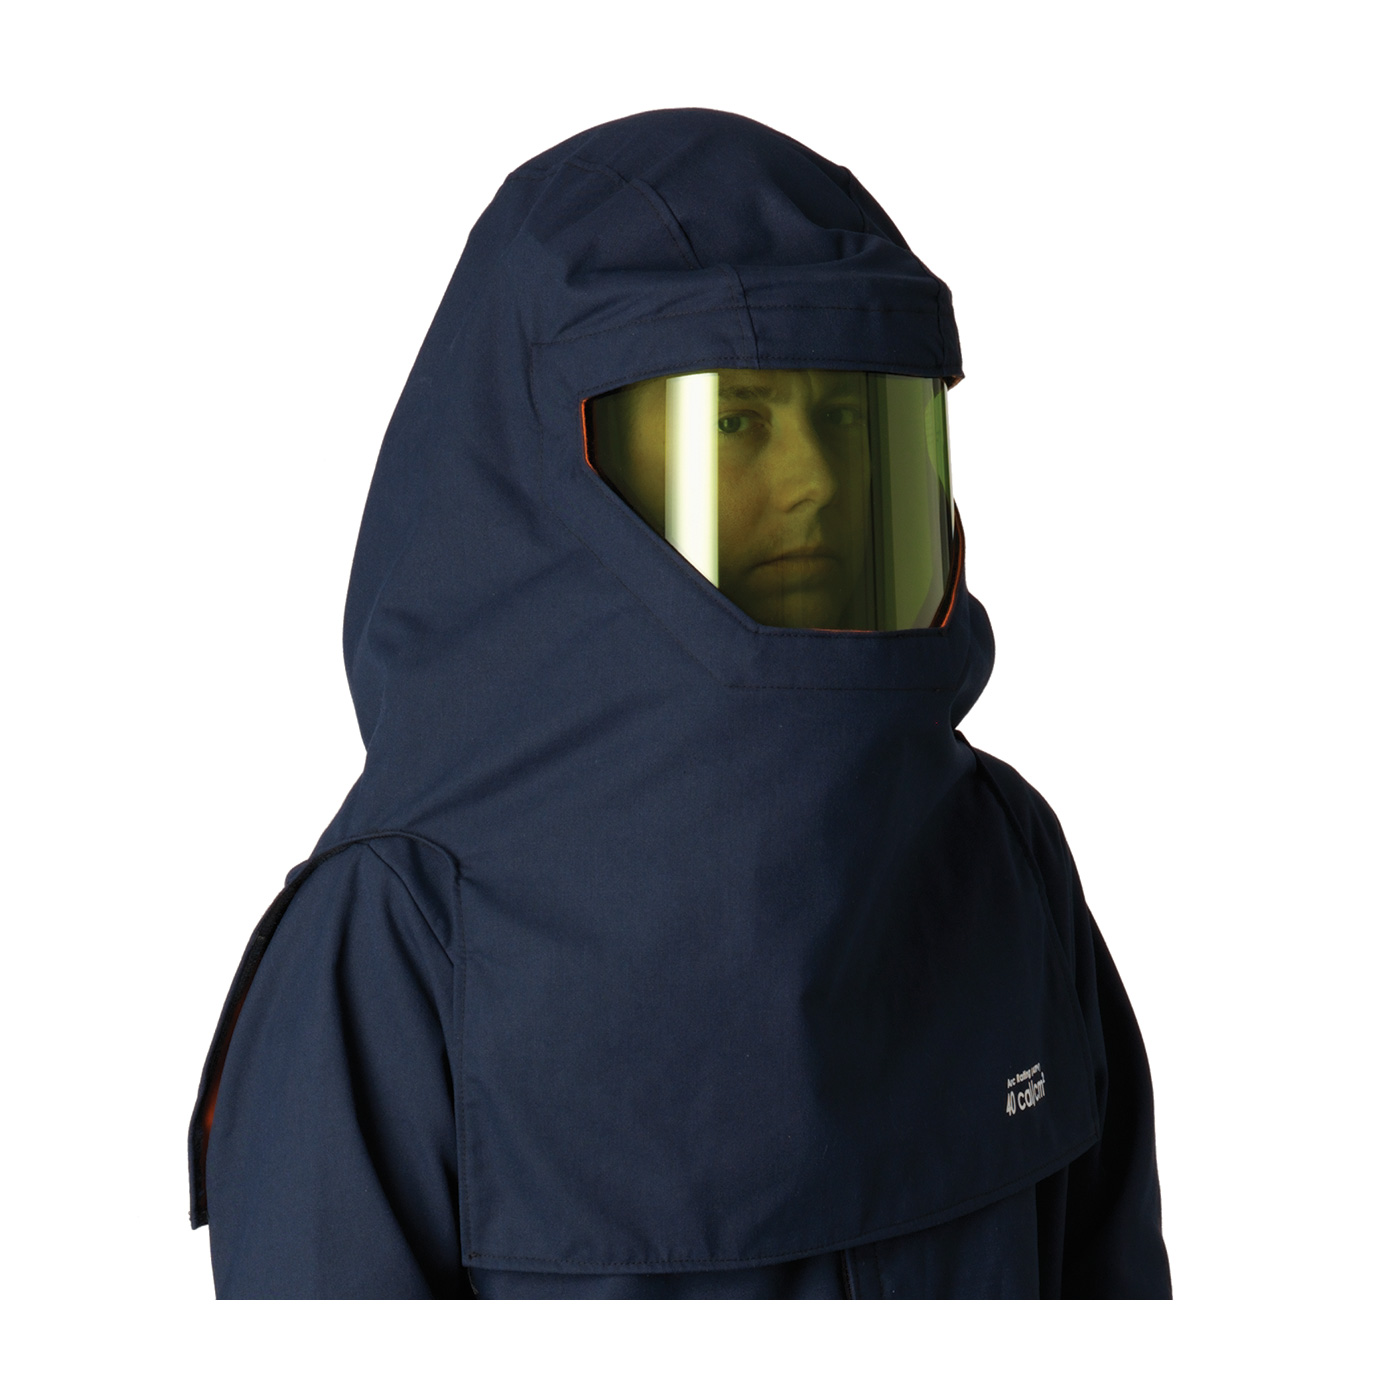 PIP® Navy 40 Cal/cm2 Two Layer Arc & Fire Resistant Ultralight Ventilated Hood - 7/6oz.